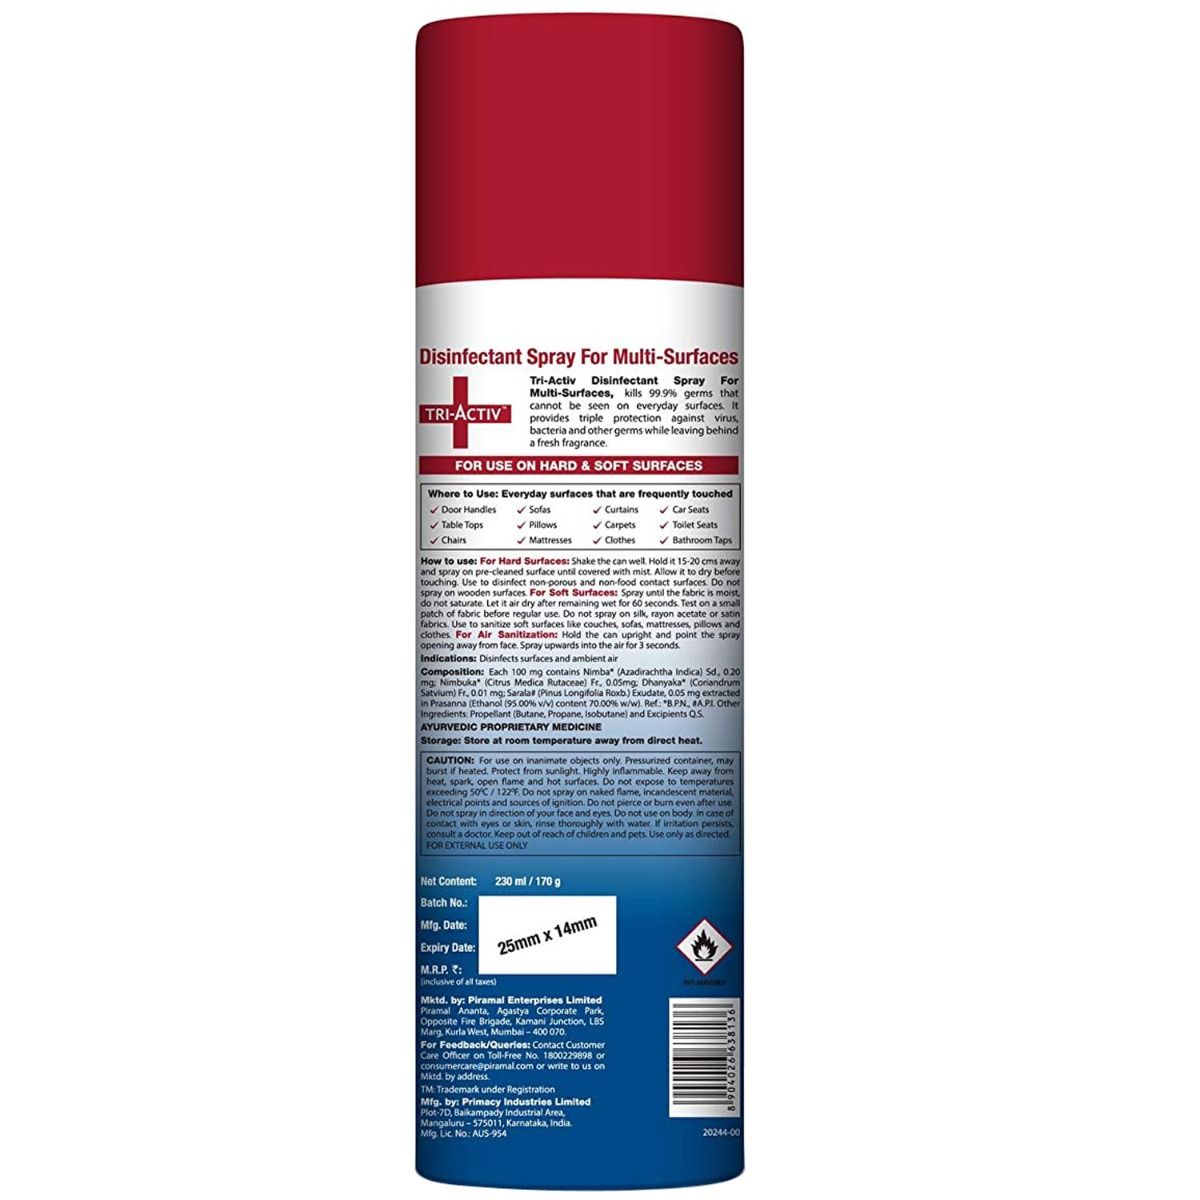 Tri-Activ Multi-Surfaces Disinfectant Spray, 230 ml, Pack of 1 